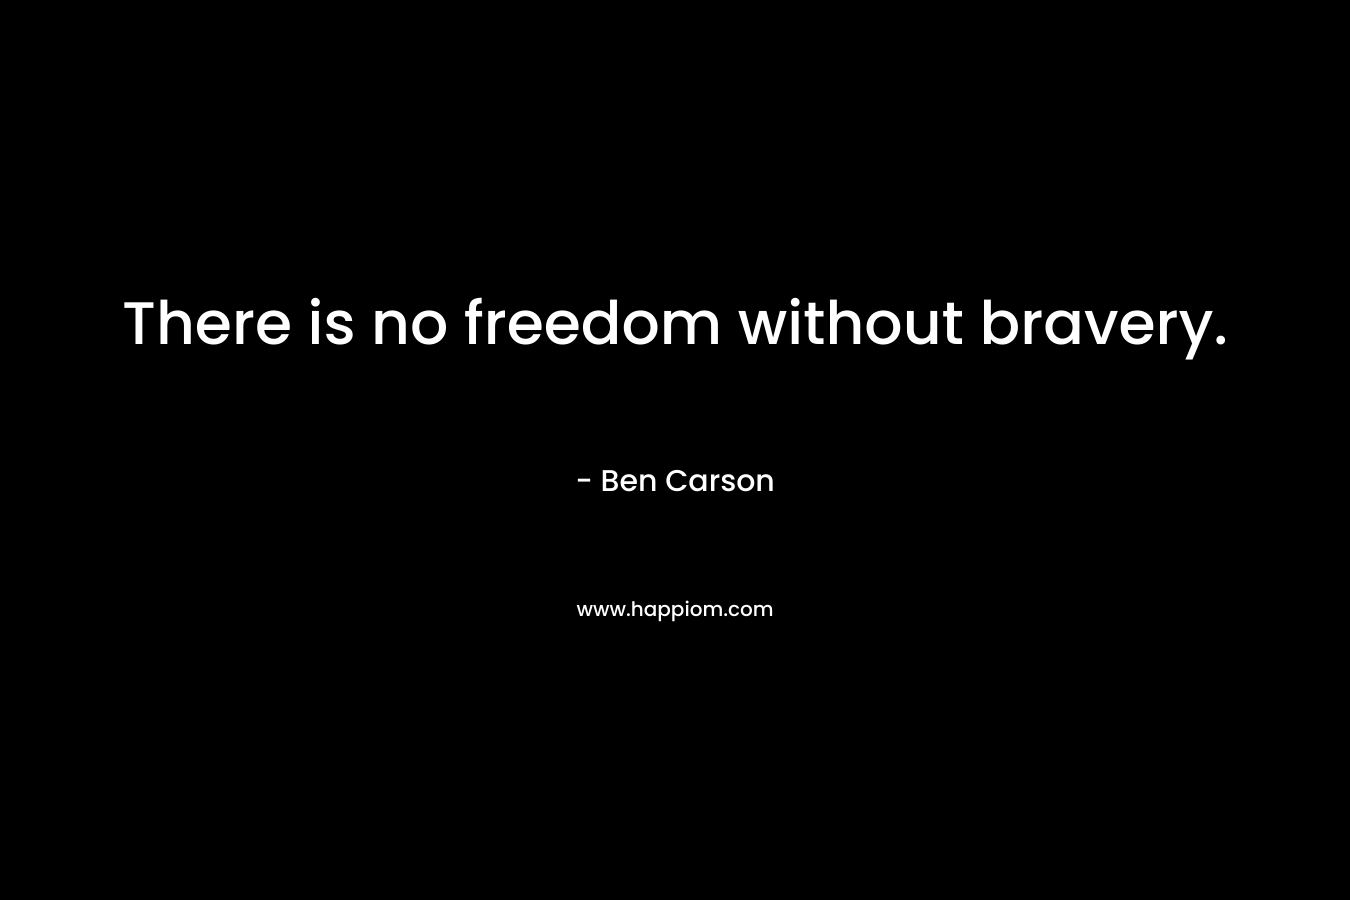 There is no freedom without bravery.